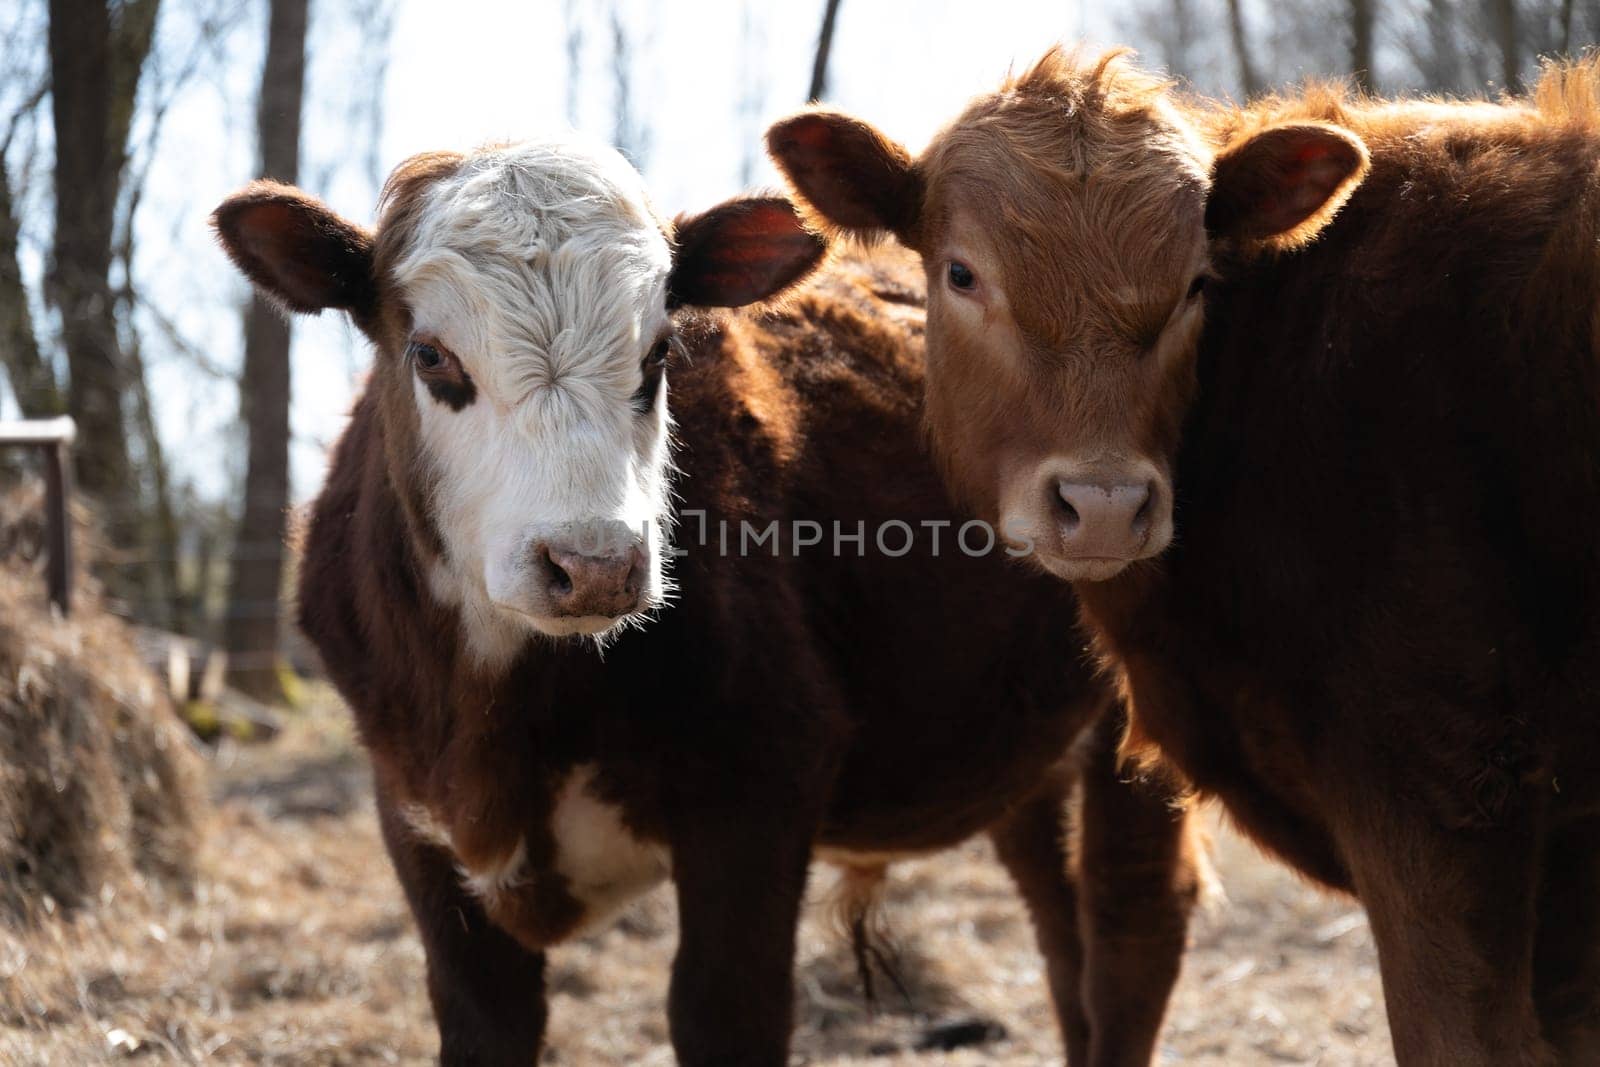 Two cows of a brown and white coloration are seen standing side by side in a grassy field. The cows are calmly facing the same direction, exuding a sense of togetherness and companionship.